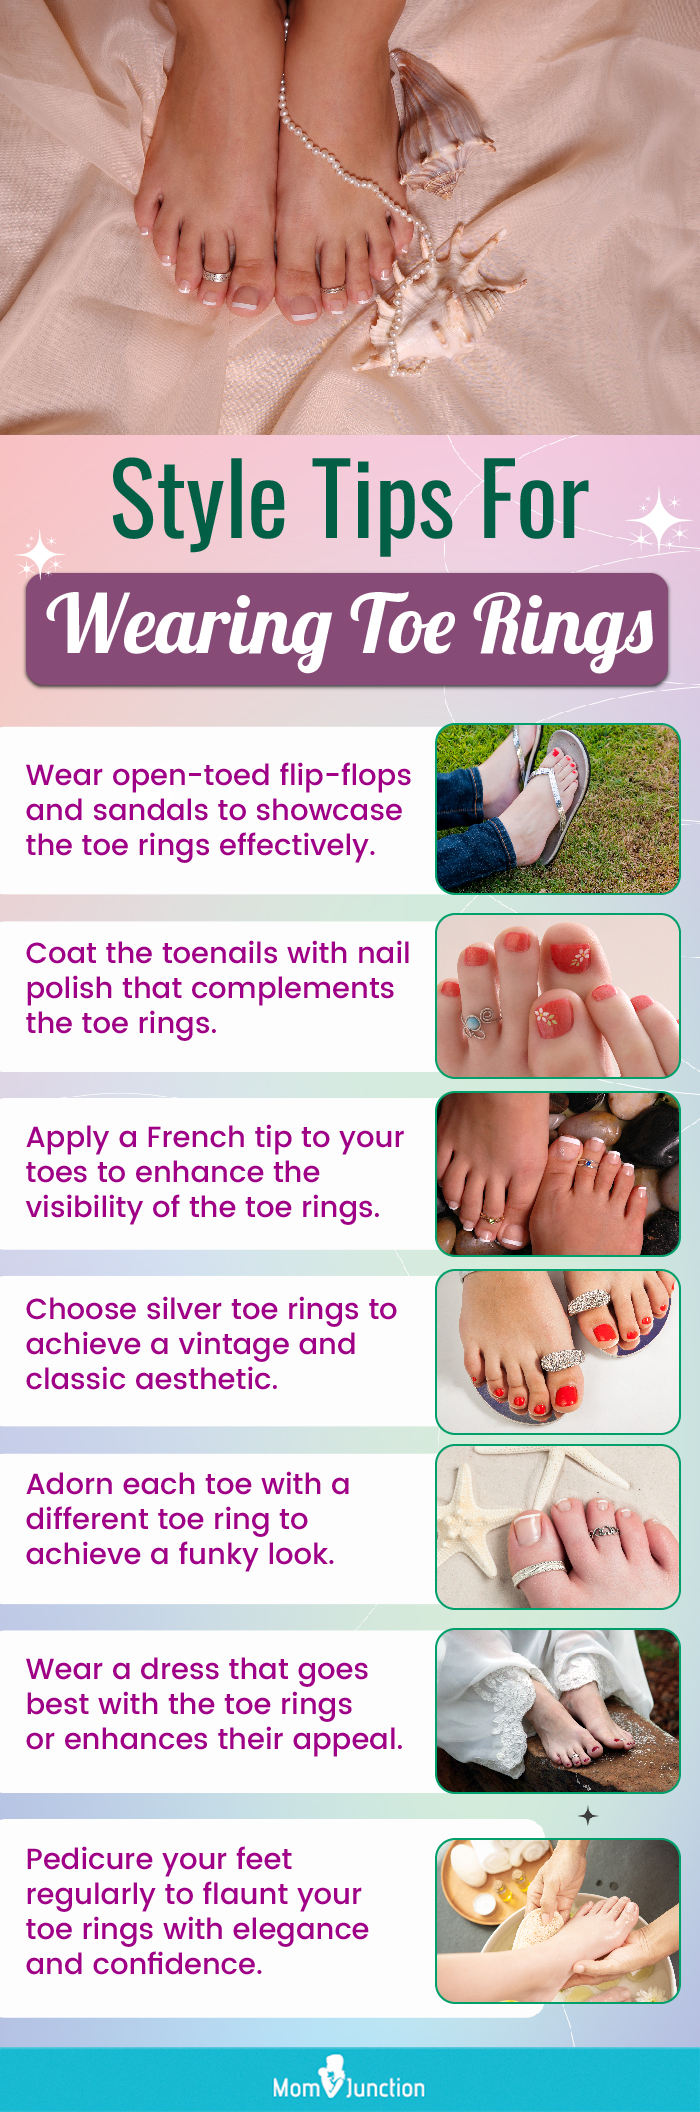 Style Tips For Wearing Toe Rings (infographic)